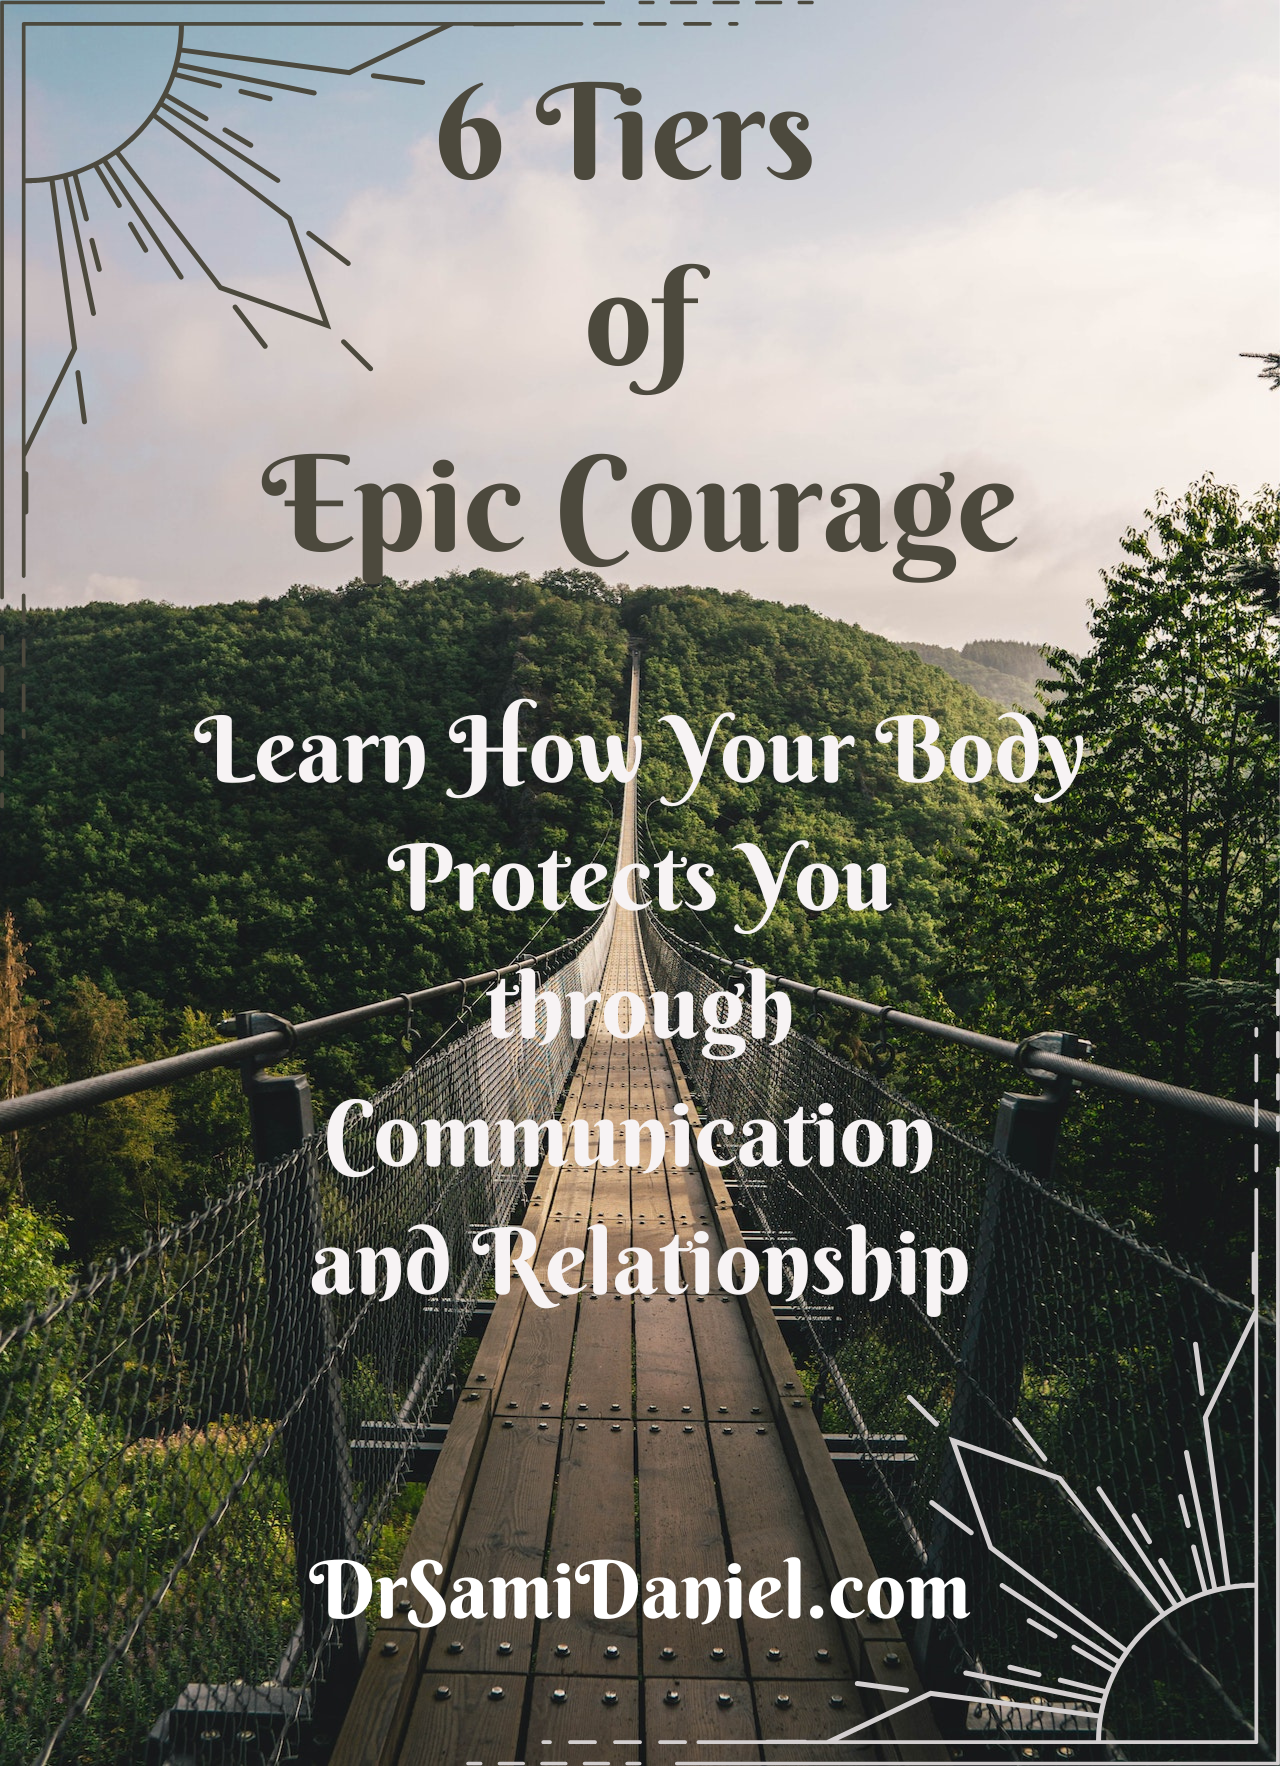 6 Tiers of Epic Courage: Learn How Your Body Protects You through Communication and Relationship